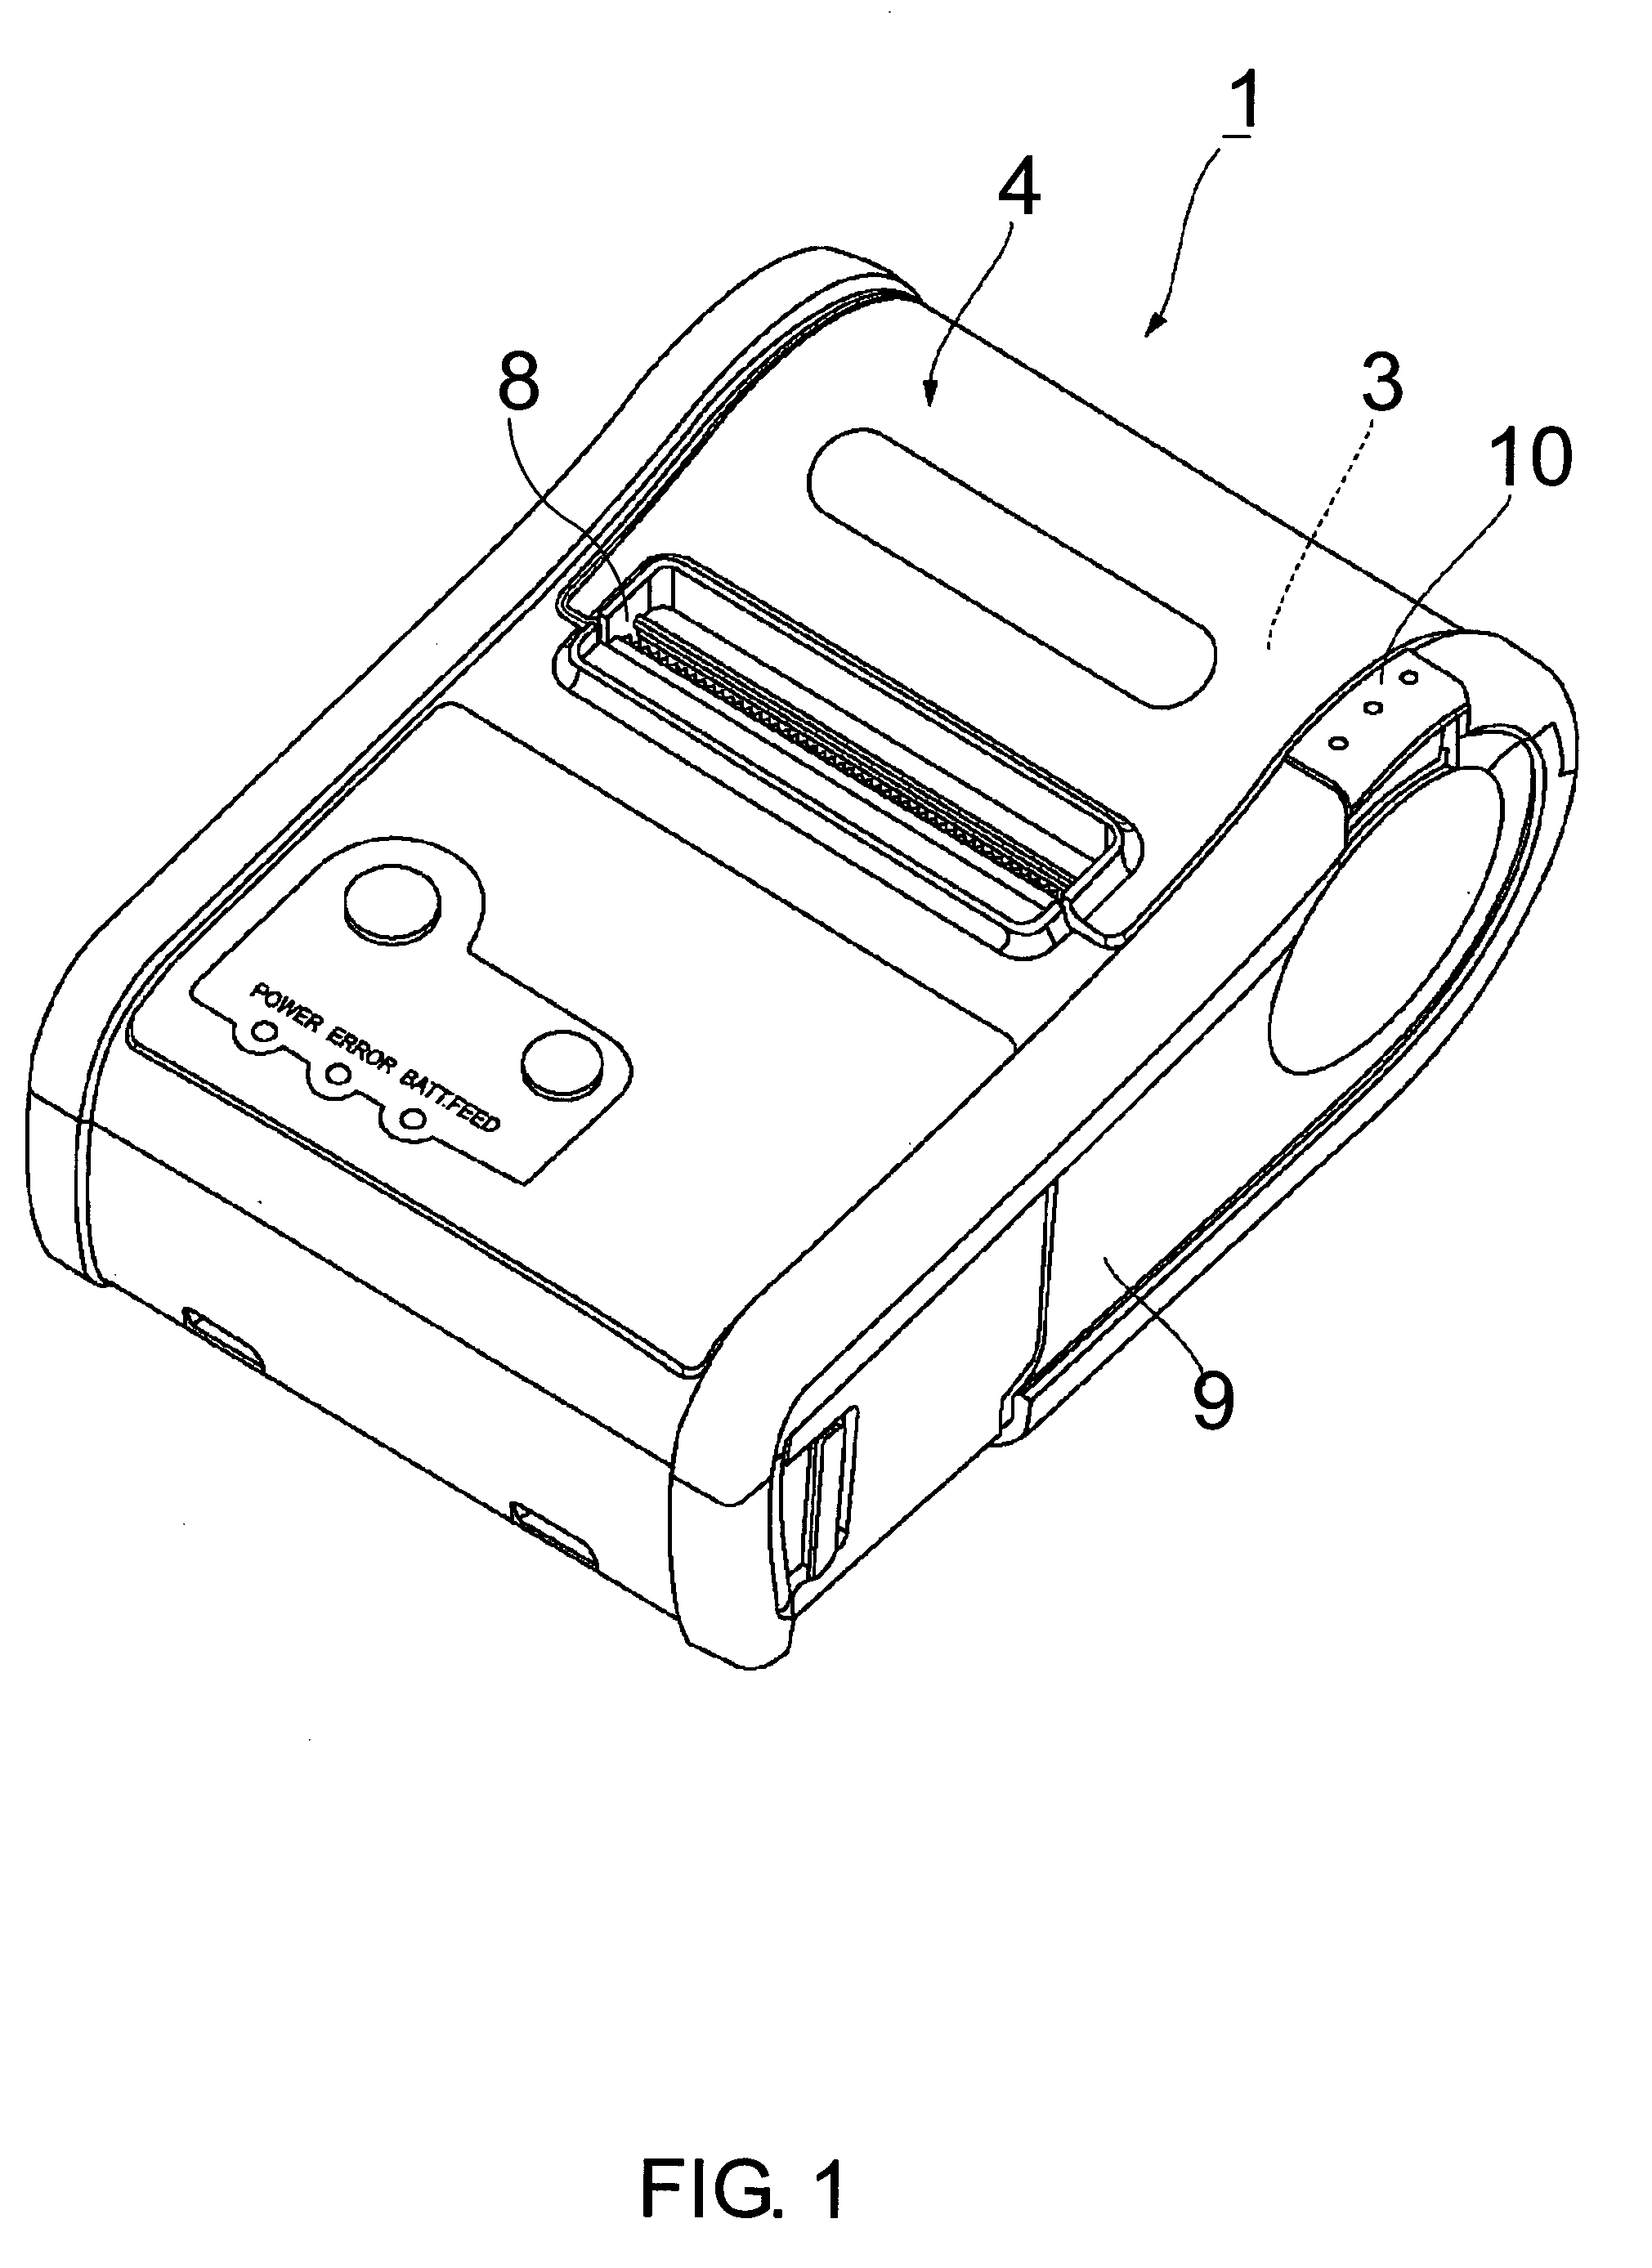 Cover locking/unlocking mechanism and a printer having the cover locking/unlocking mechanism